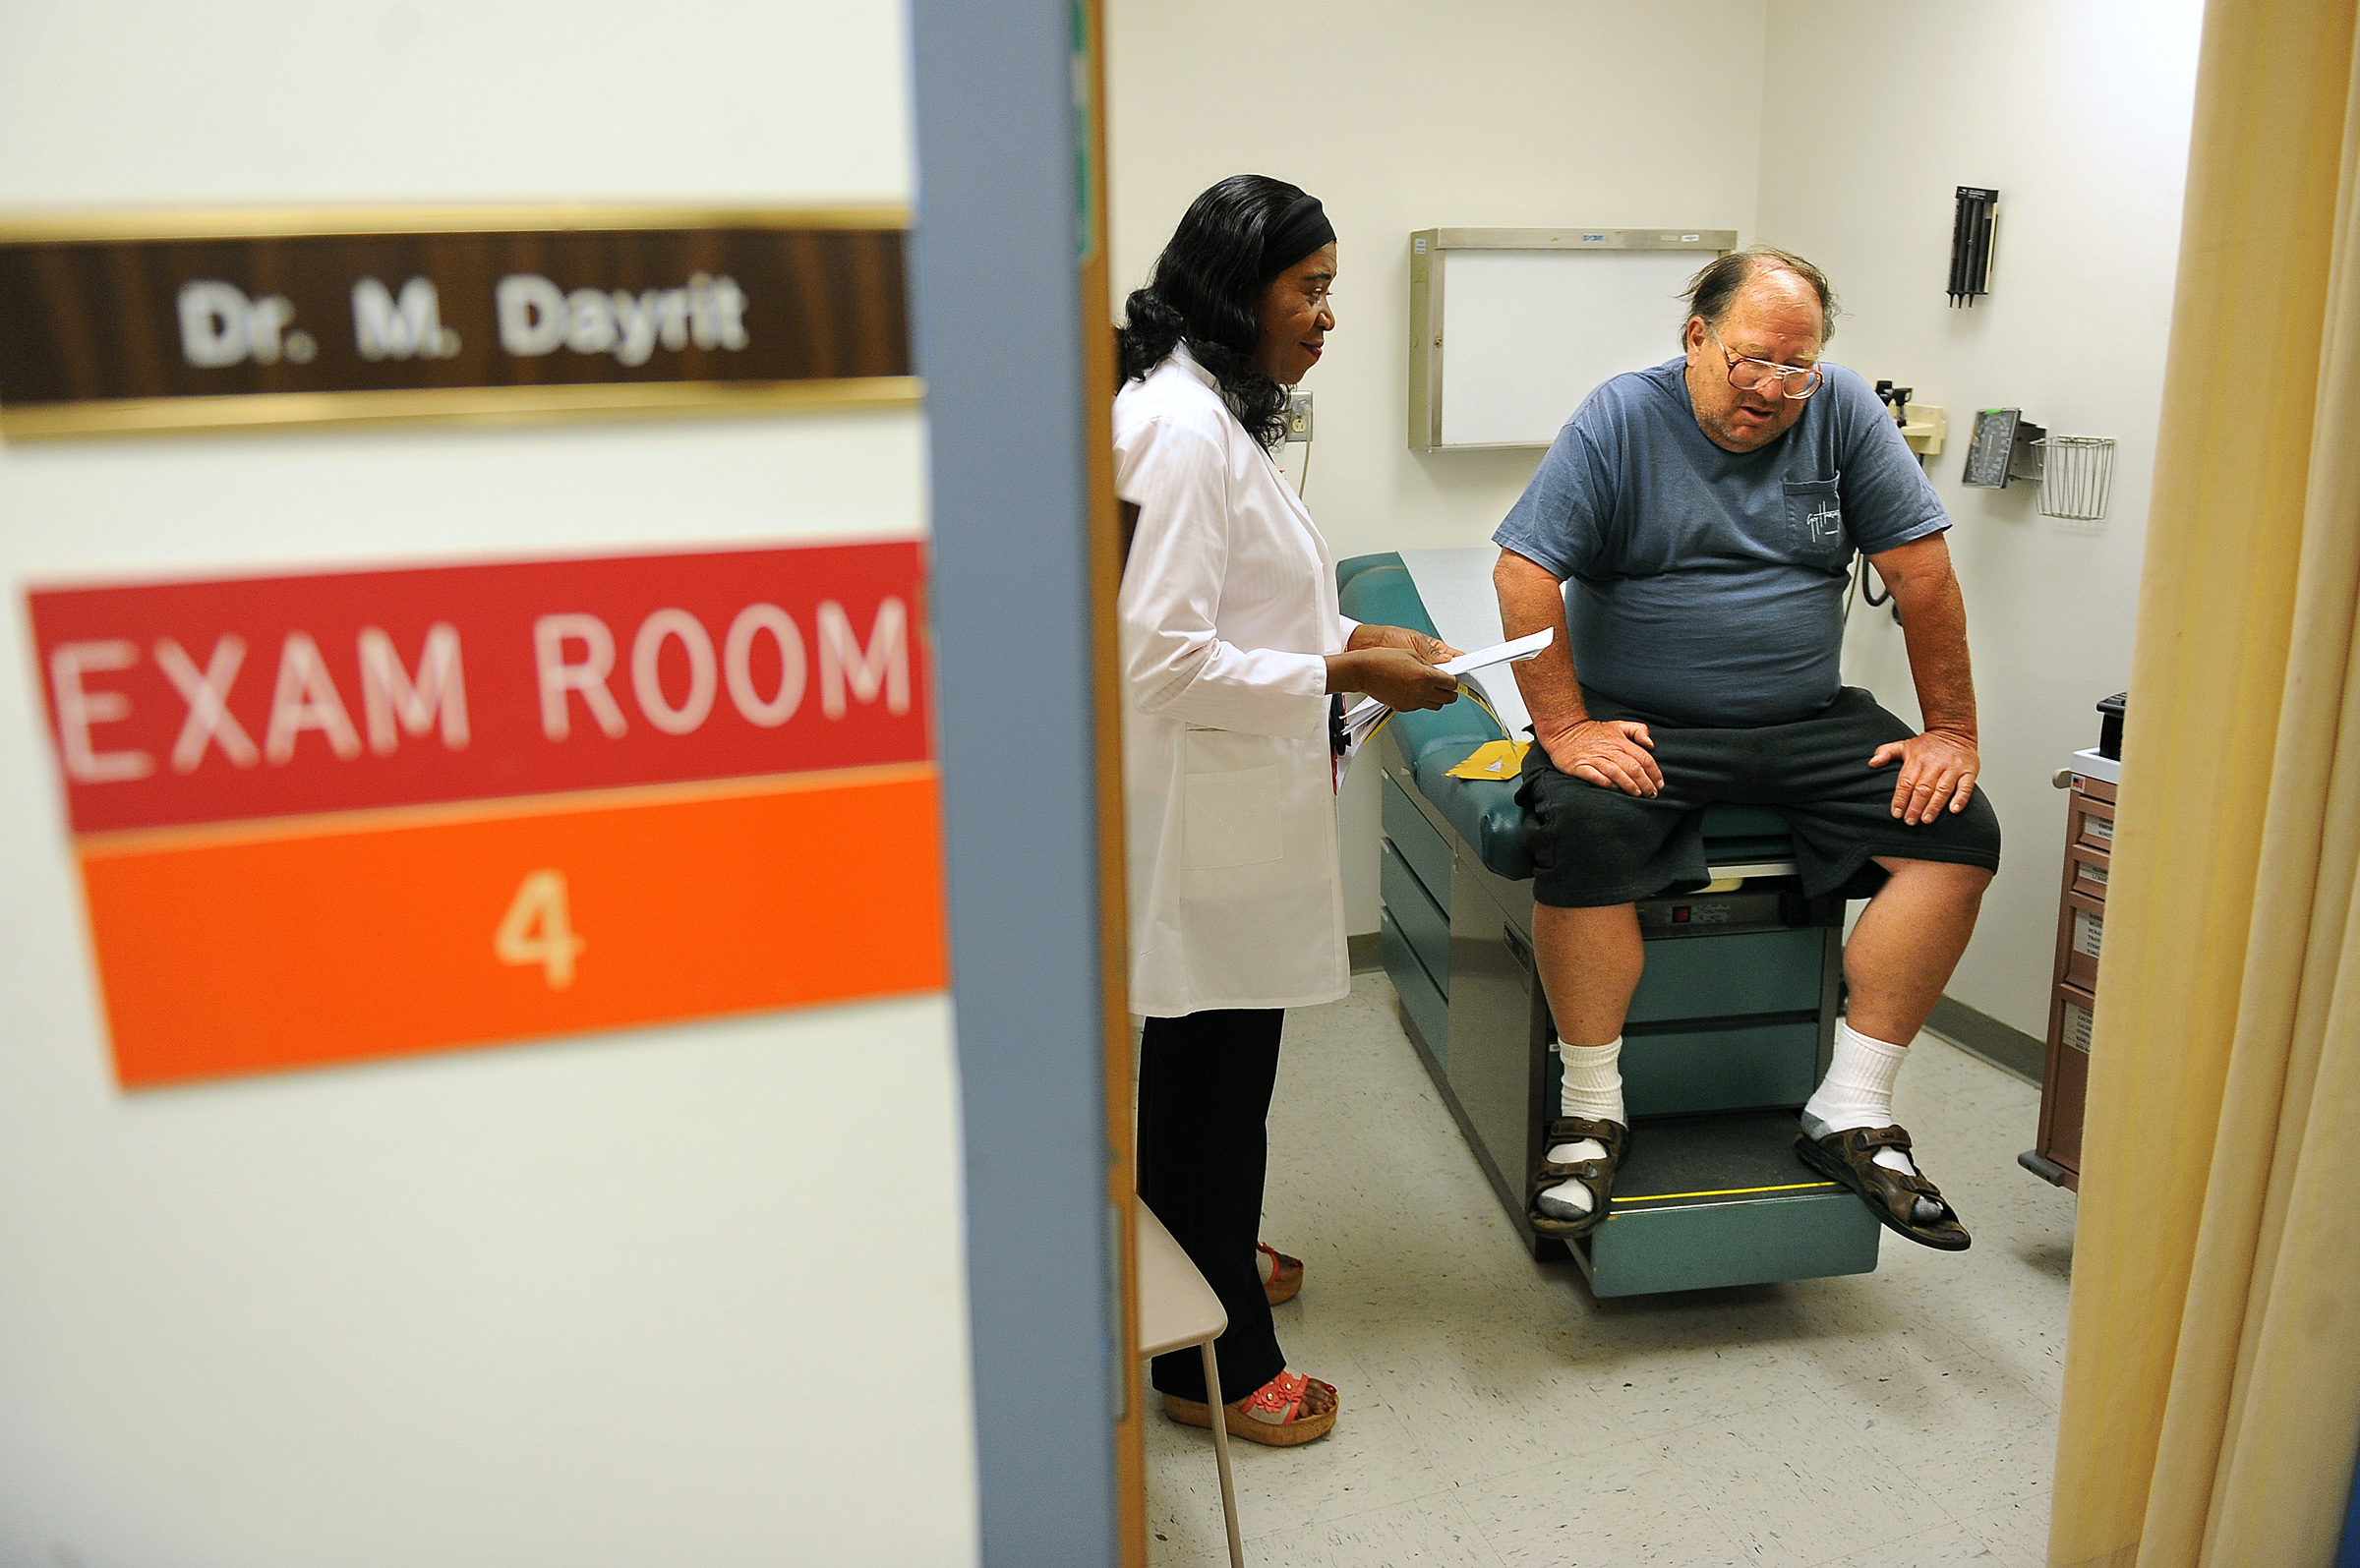 A patient talks with a physician in an examination room during a consultation.